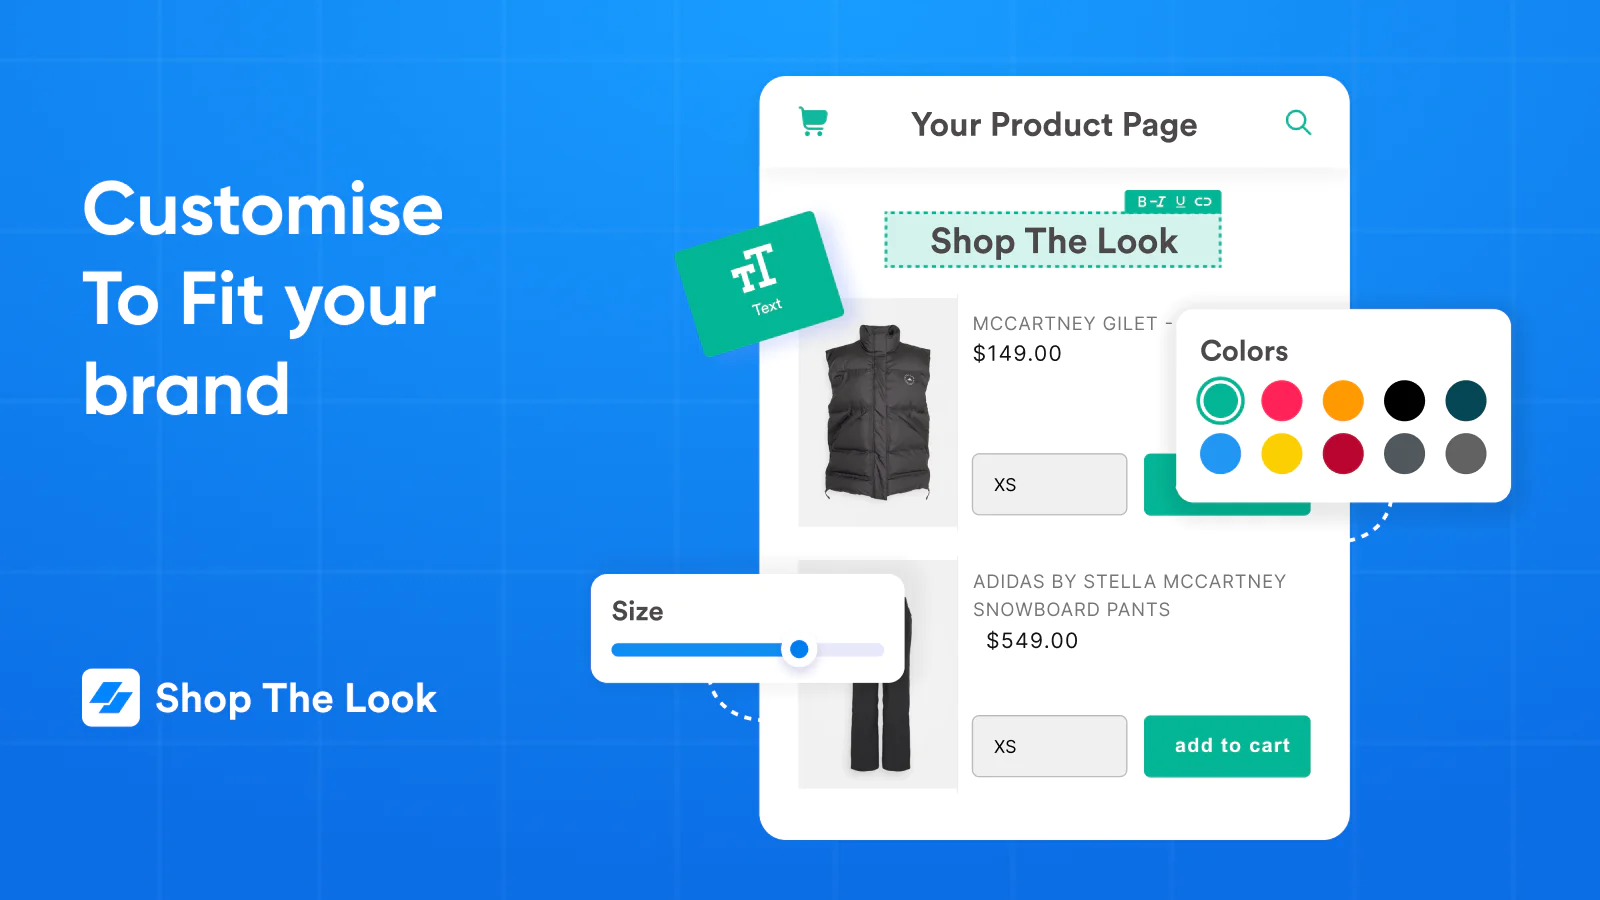 optimized for mobile no code required build multiple lookbooks product bundles brand guidelines